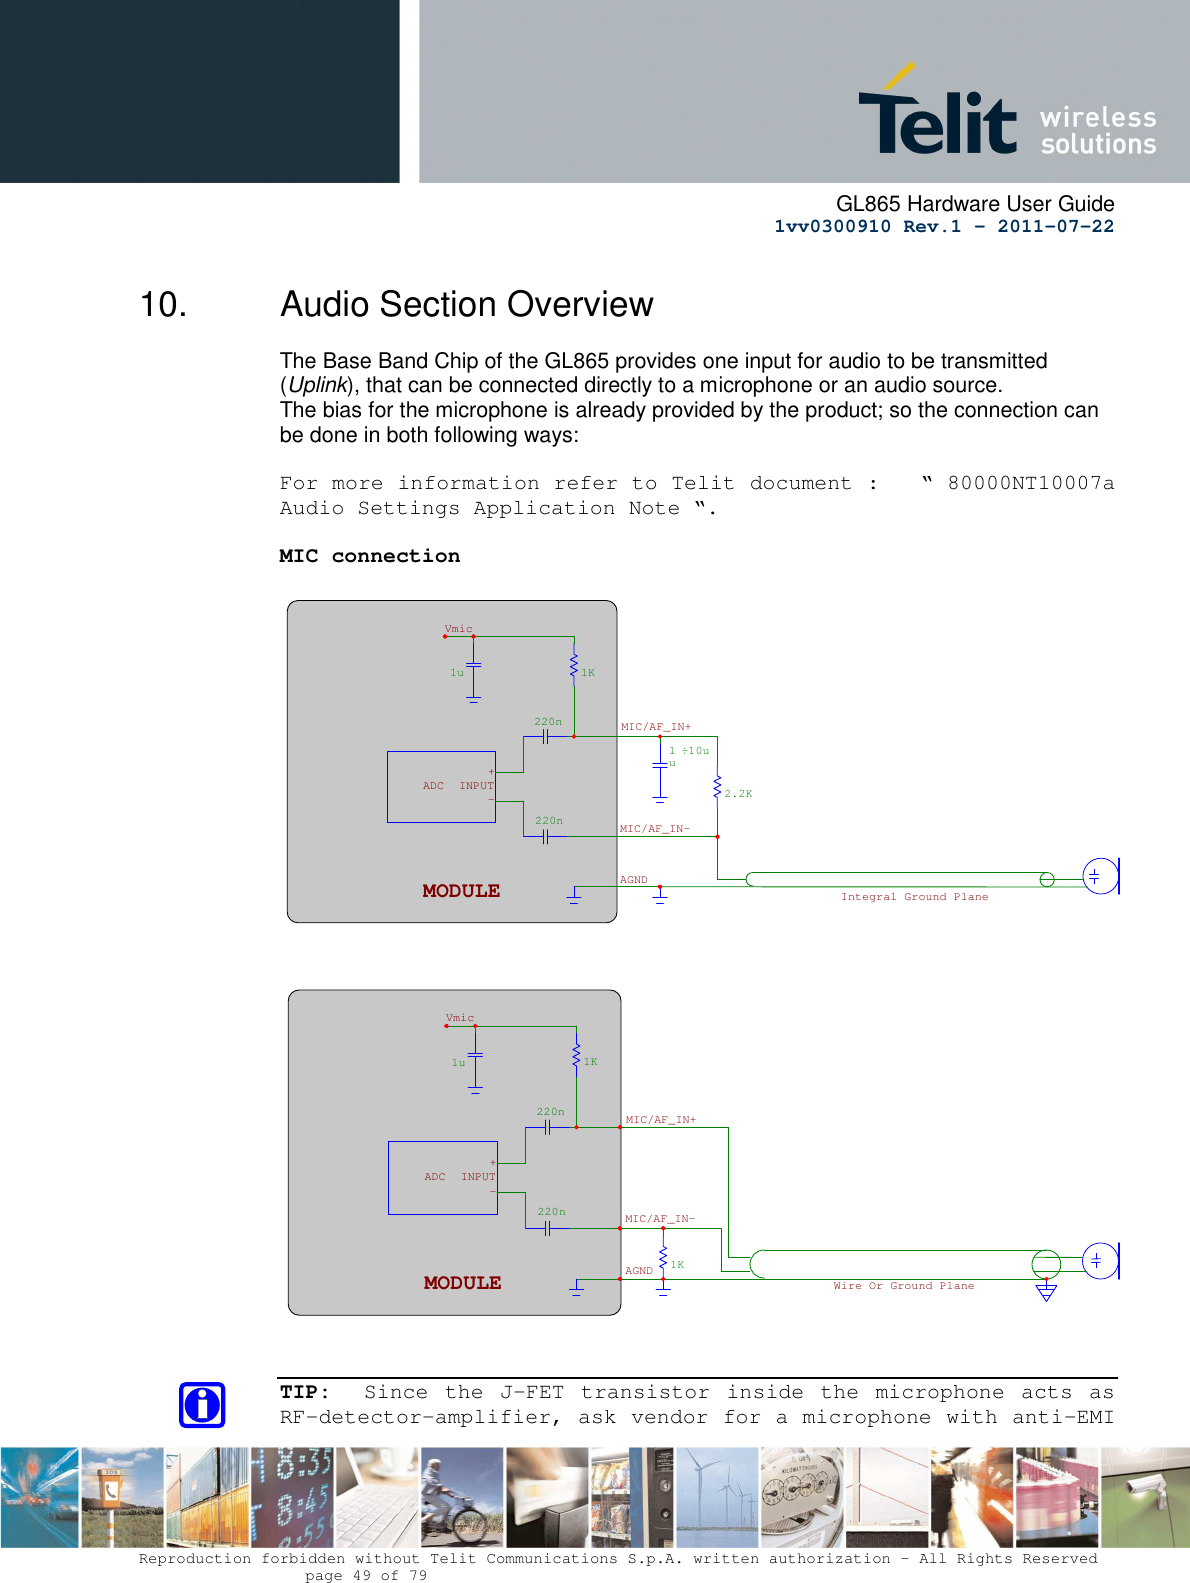      GL865 Hardware User Guide     1vv0300910 Rev.1 – 2011-07-22       Reproduction forbidden without Telit Communications S.p.A. written authorization - All Rights Reserved    page 49 of 79  10.  Audio Section Overview The Base Band Chip of the GL865 provides one input for audio to be transmitted (Uplink), that can be connected directly to a microphone or an audio source. The bias for the microphone is already provided by the product; so the connection can be done in both following ways:  For more information refer to Telit document :   “ 80000NT10007a Audio Settings Application Note “.  MIC connection       TIP:   Since  the  J-FET  transistor  inside  the  microphone  acts as RF-detector-amplifier, ask vendor for a microphone with anti-EMI 1u 220n220n1K1K MIC/AF_IN+ MIC/AF_IN-AGNDMODULE -+INPUTADCVmicWire Or Ground Plane 1u220n220n 1K2.2K 1u ÷10uMODULE - + INPUTADC Vmic MIC/AF_IN+MIC/AF_IN- AGND Integral Ground Plane 